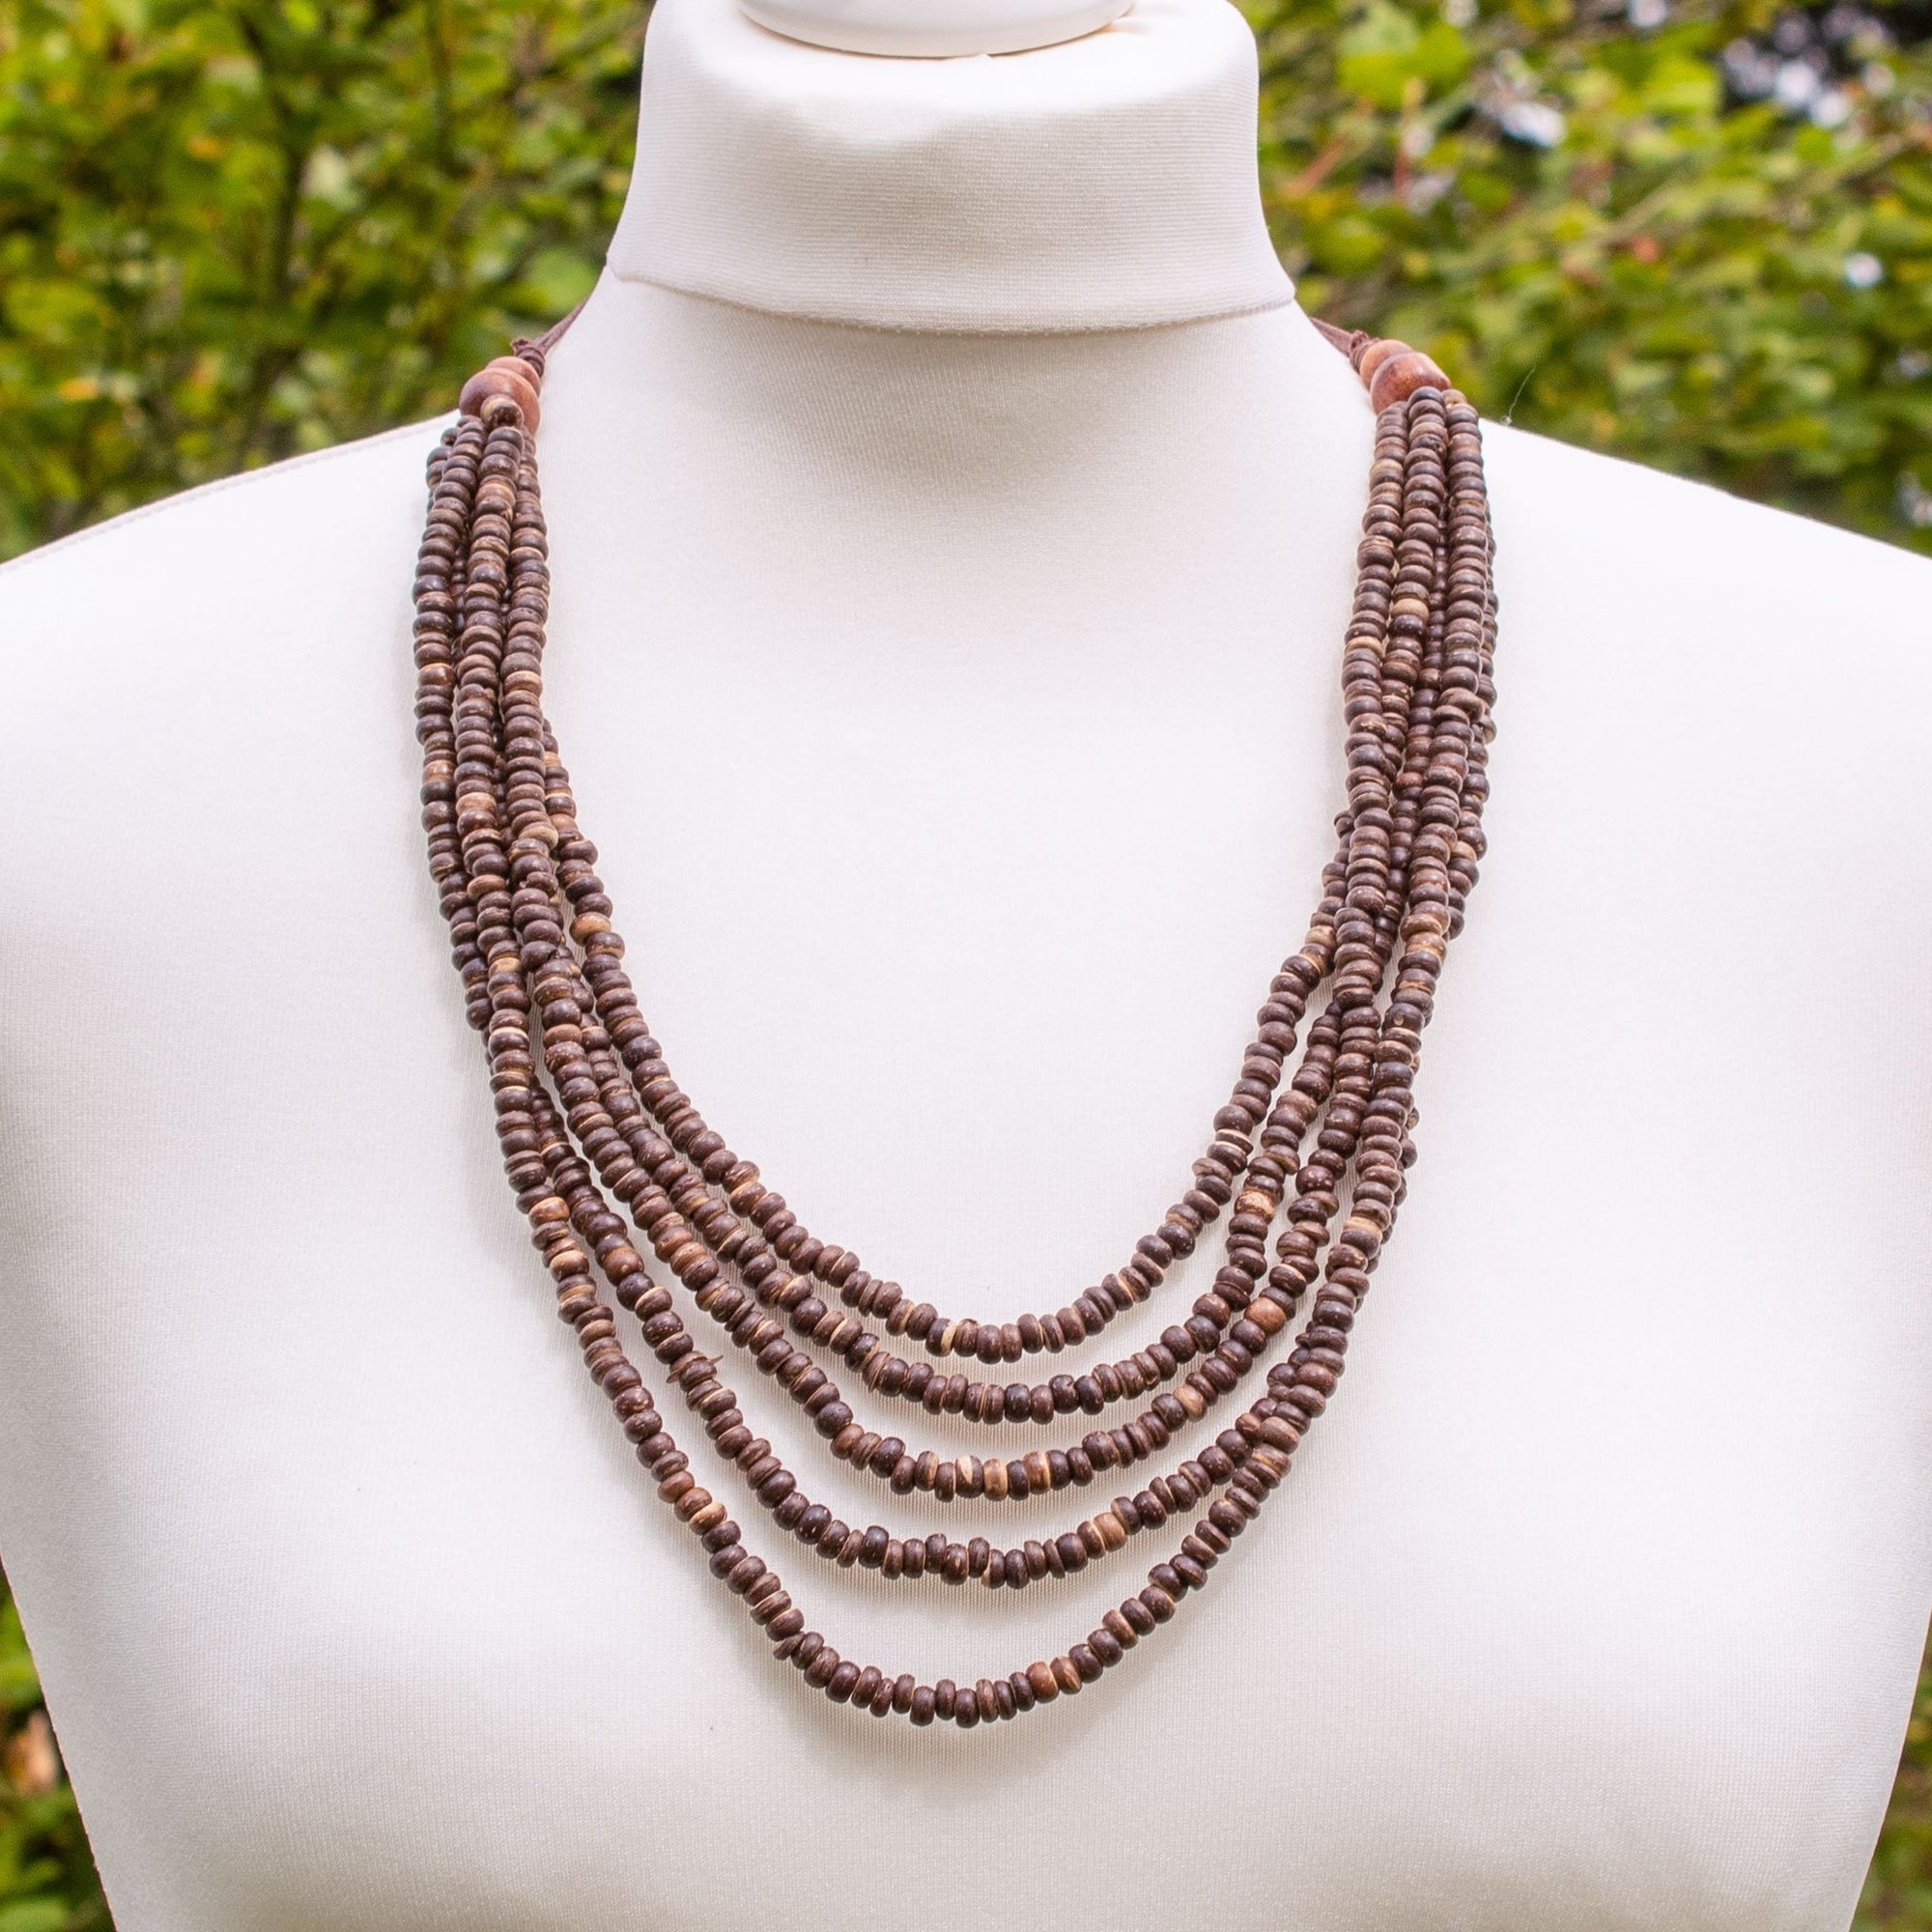 Brown Wooden Bead Necklace | Necklace - The Naughty Shrew